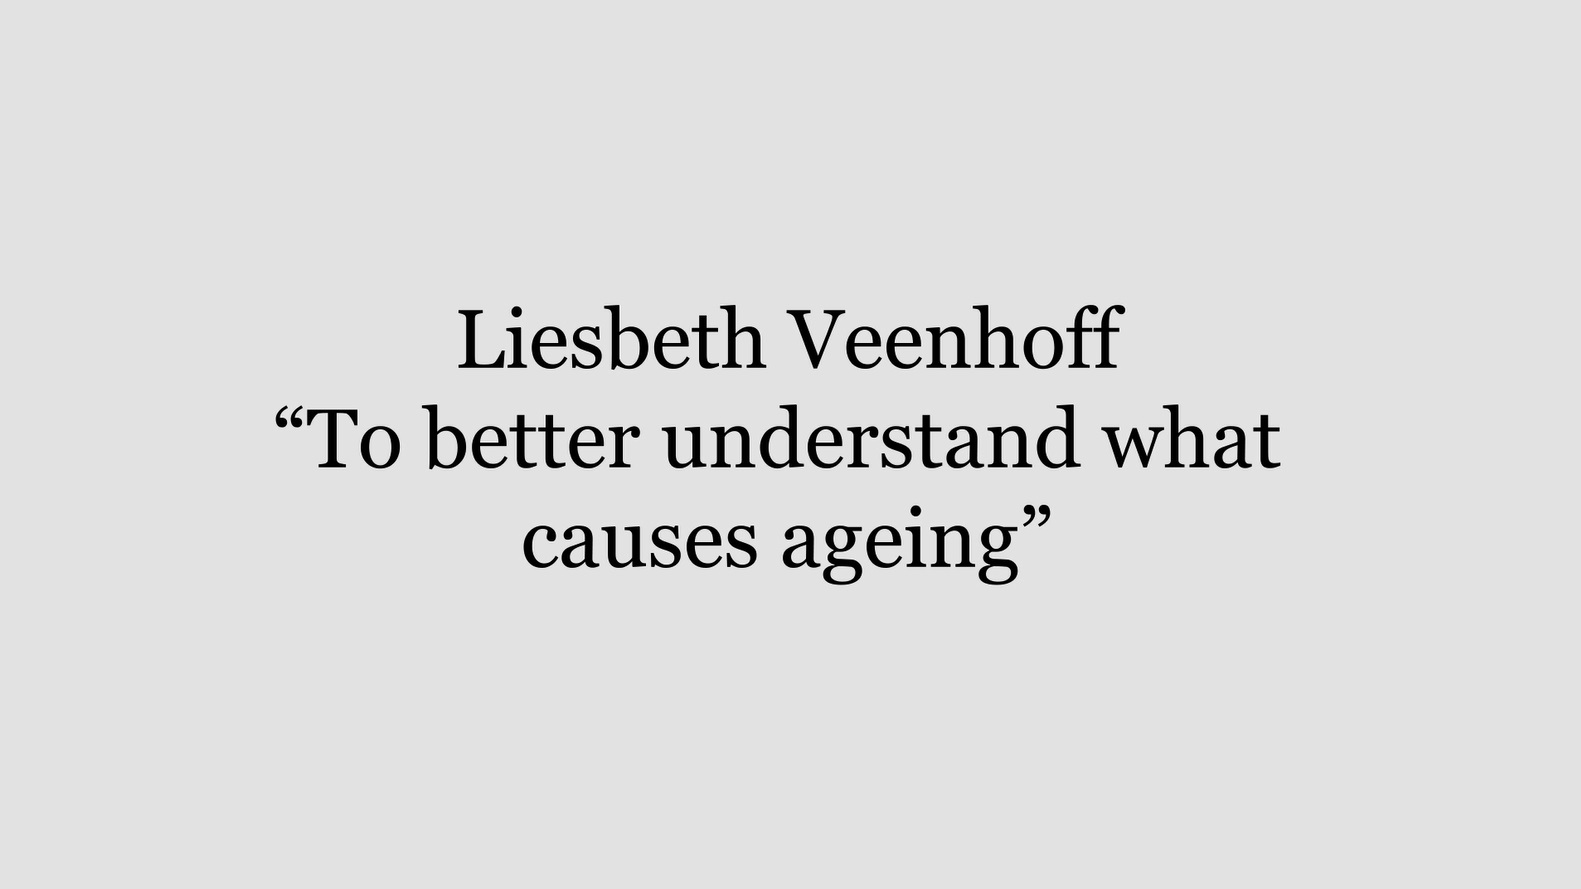 To better understand what causes ageing by Liesbeth Veenhoff